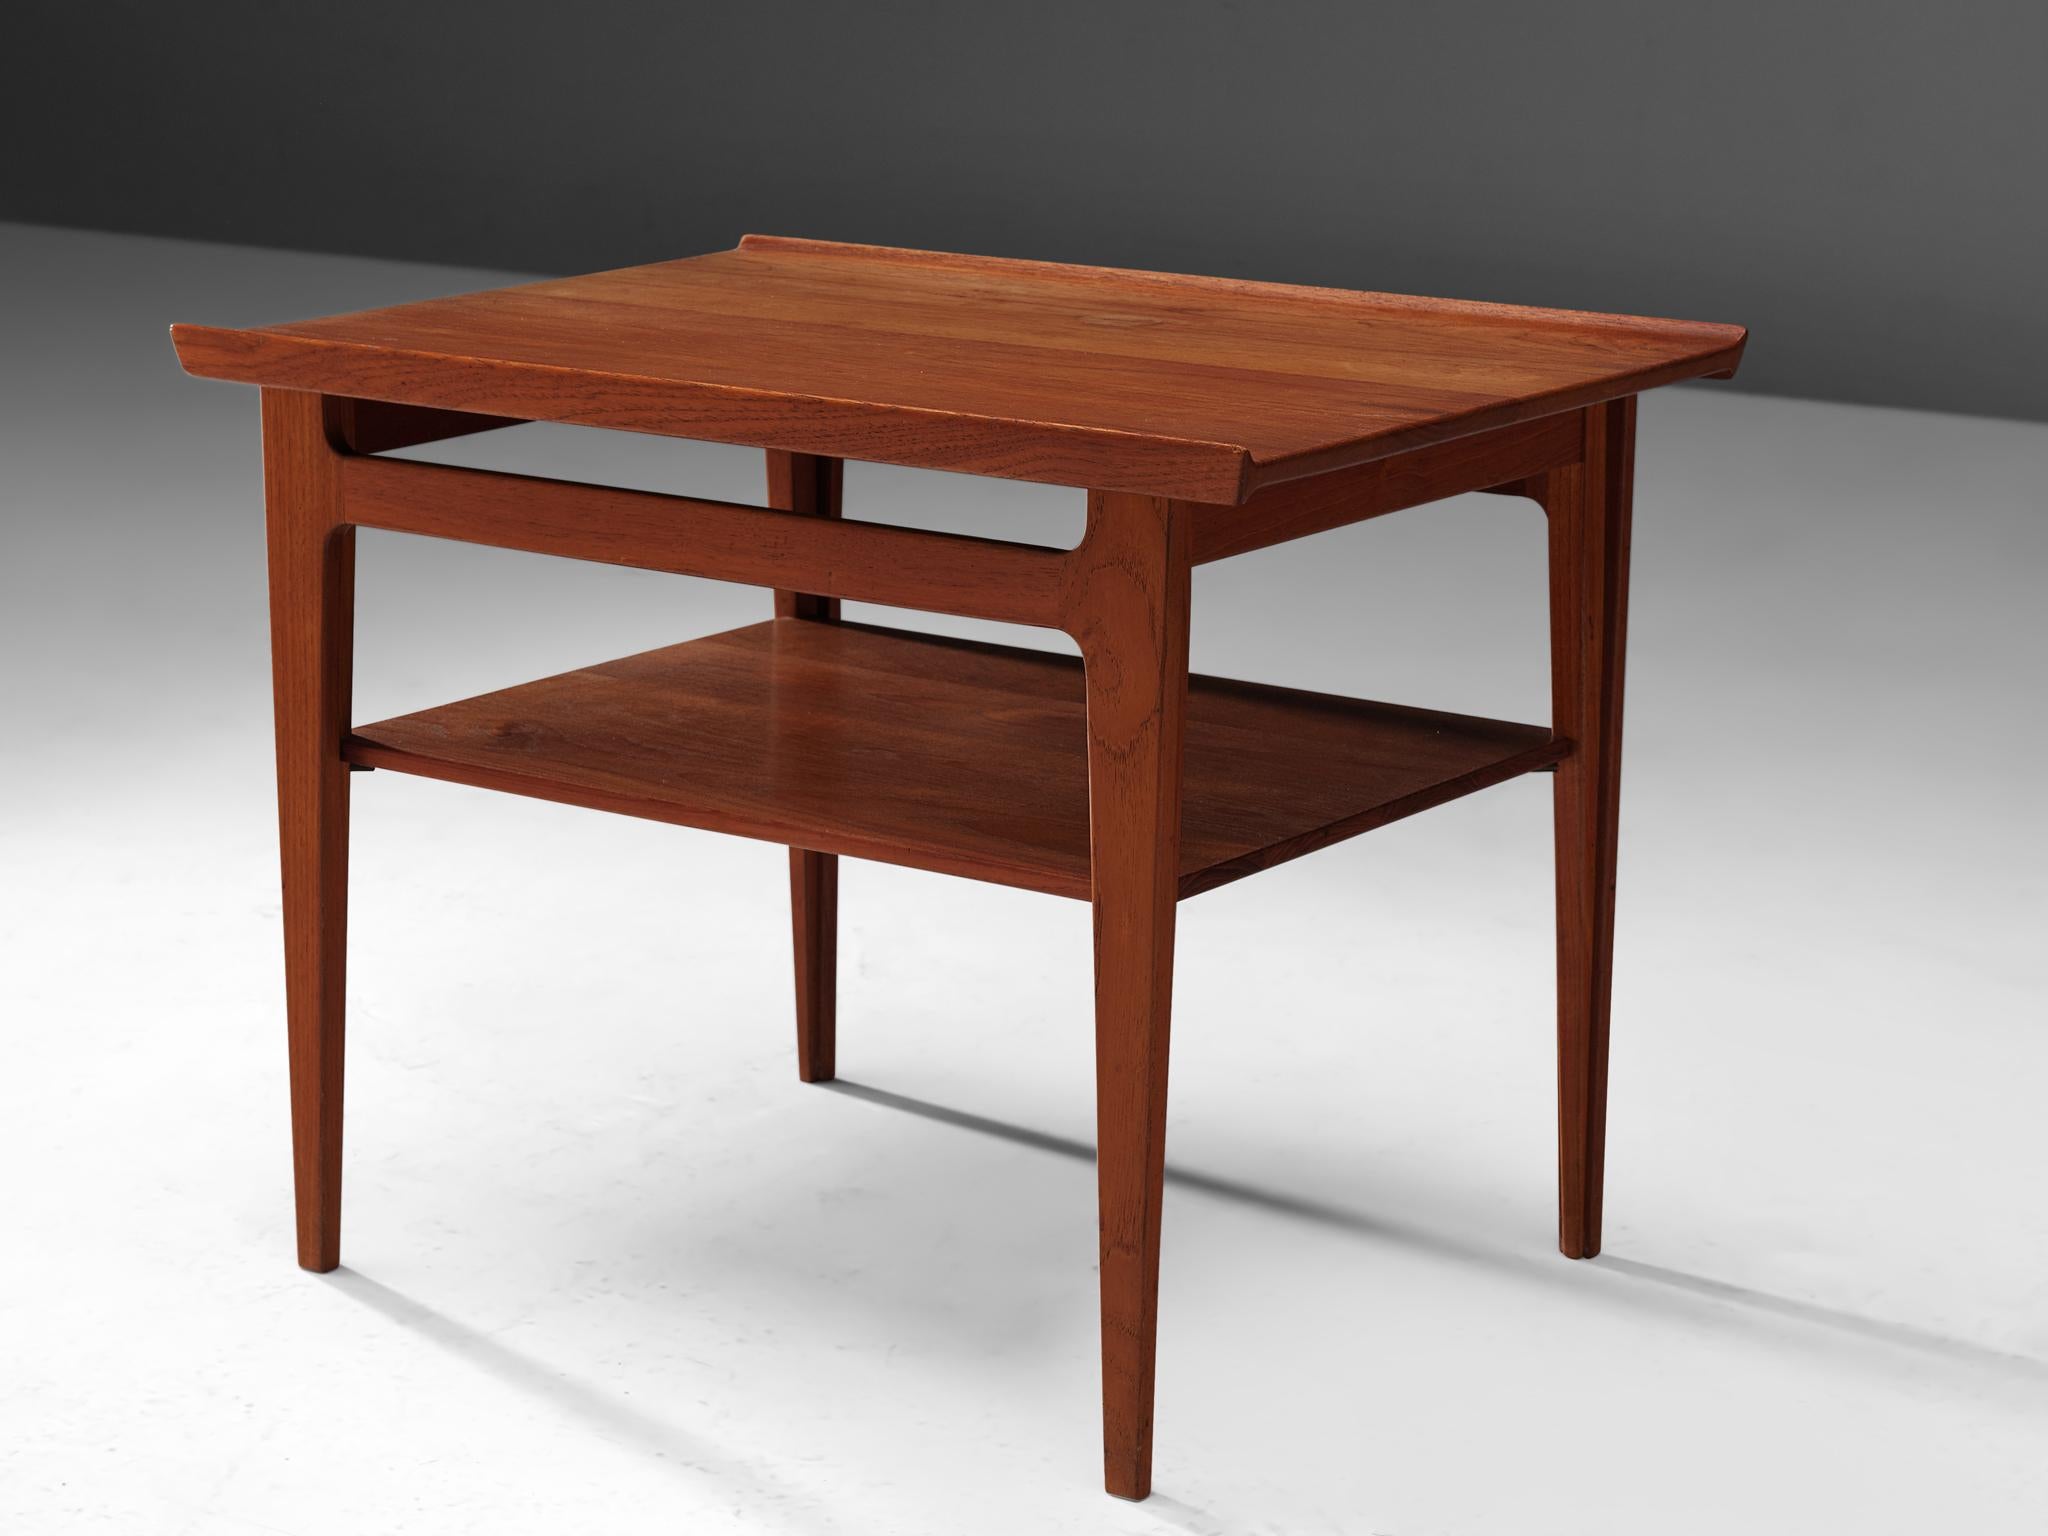 Elegant Coffee Table from the 500 series, by Finn Juhl for France & Davoricksen, coffee table, teak, Denmark, 1958.
 
This solid teak coffee table was part of the 500 series that included a square and a rectangular side table with the common feature